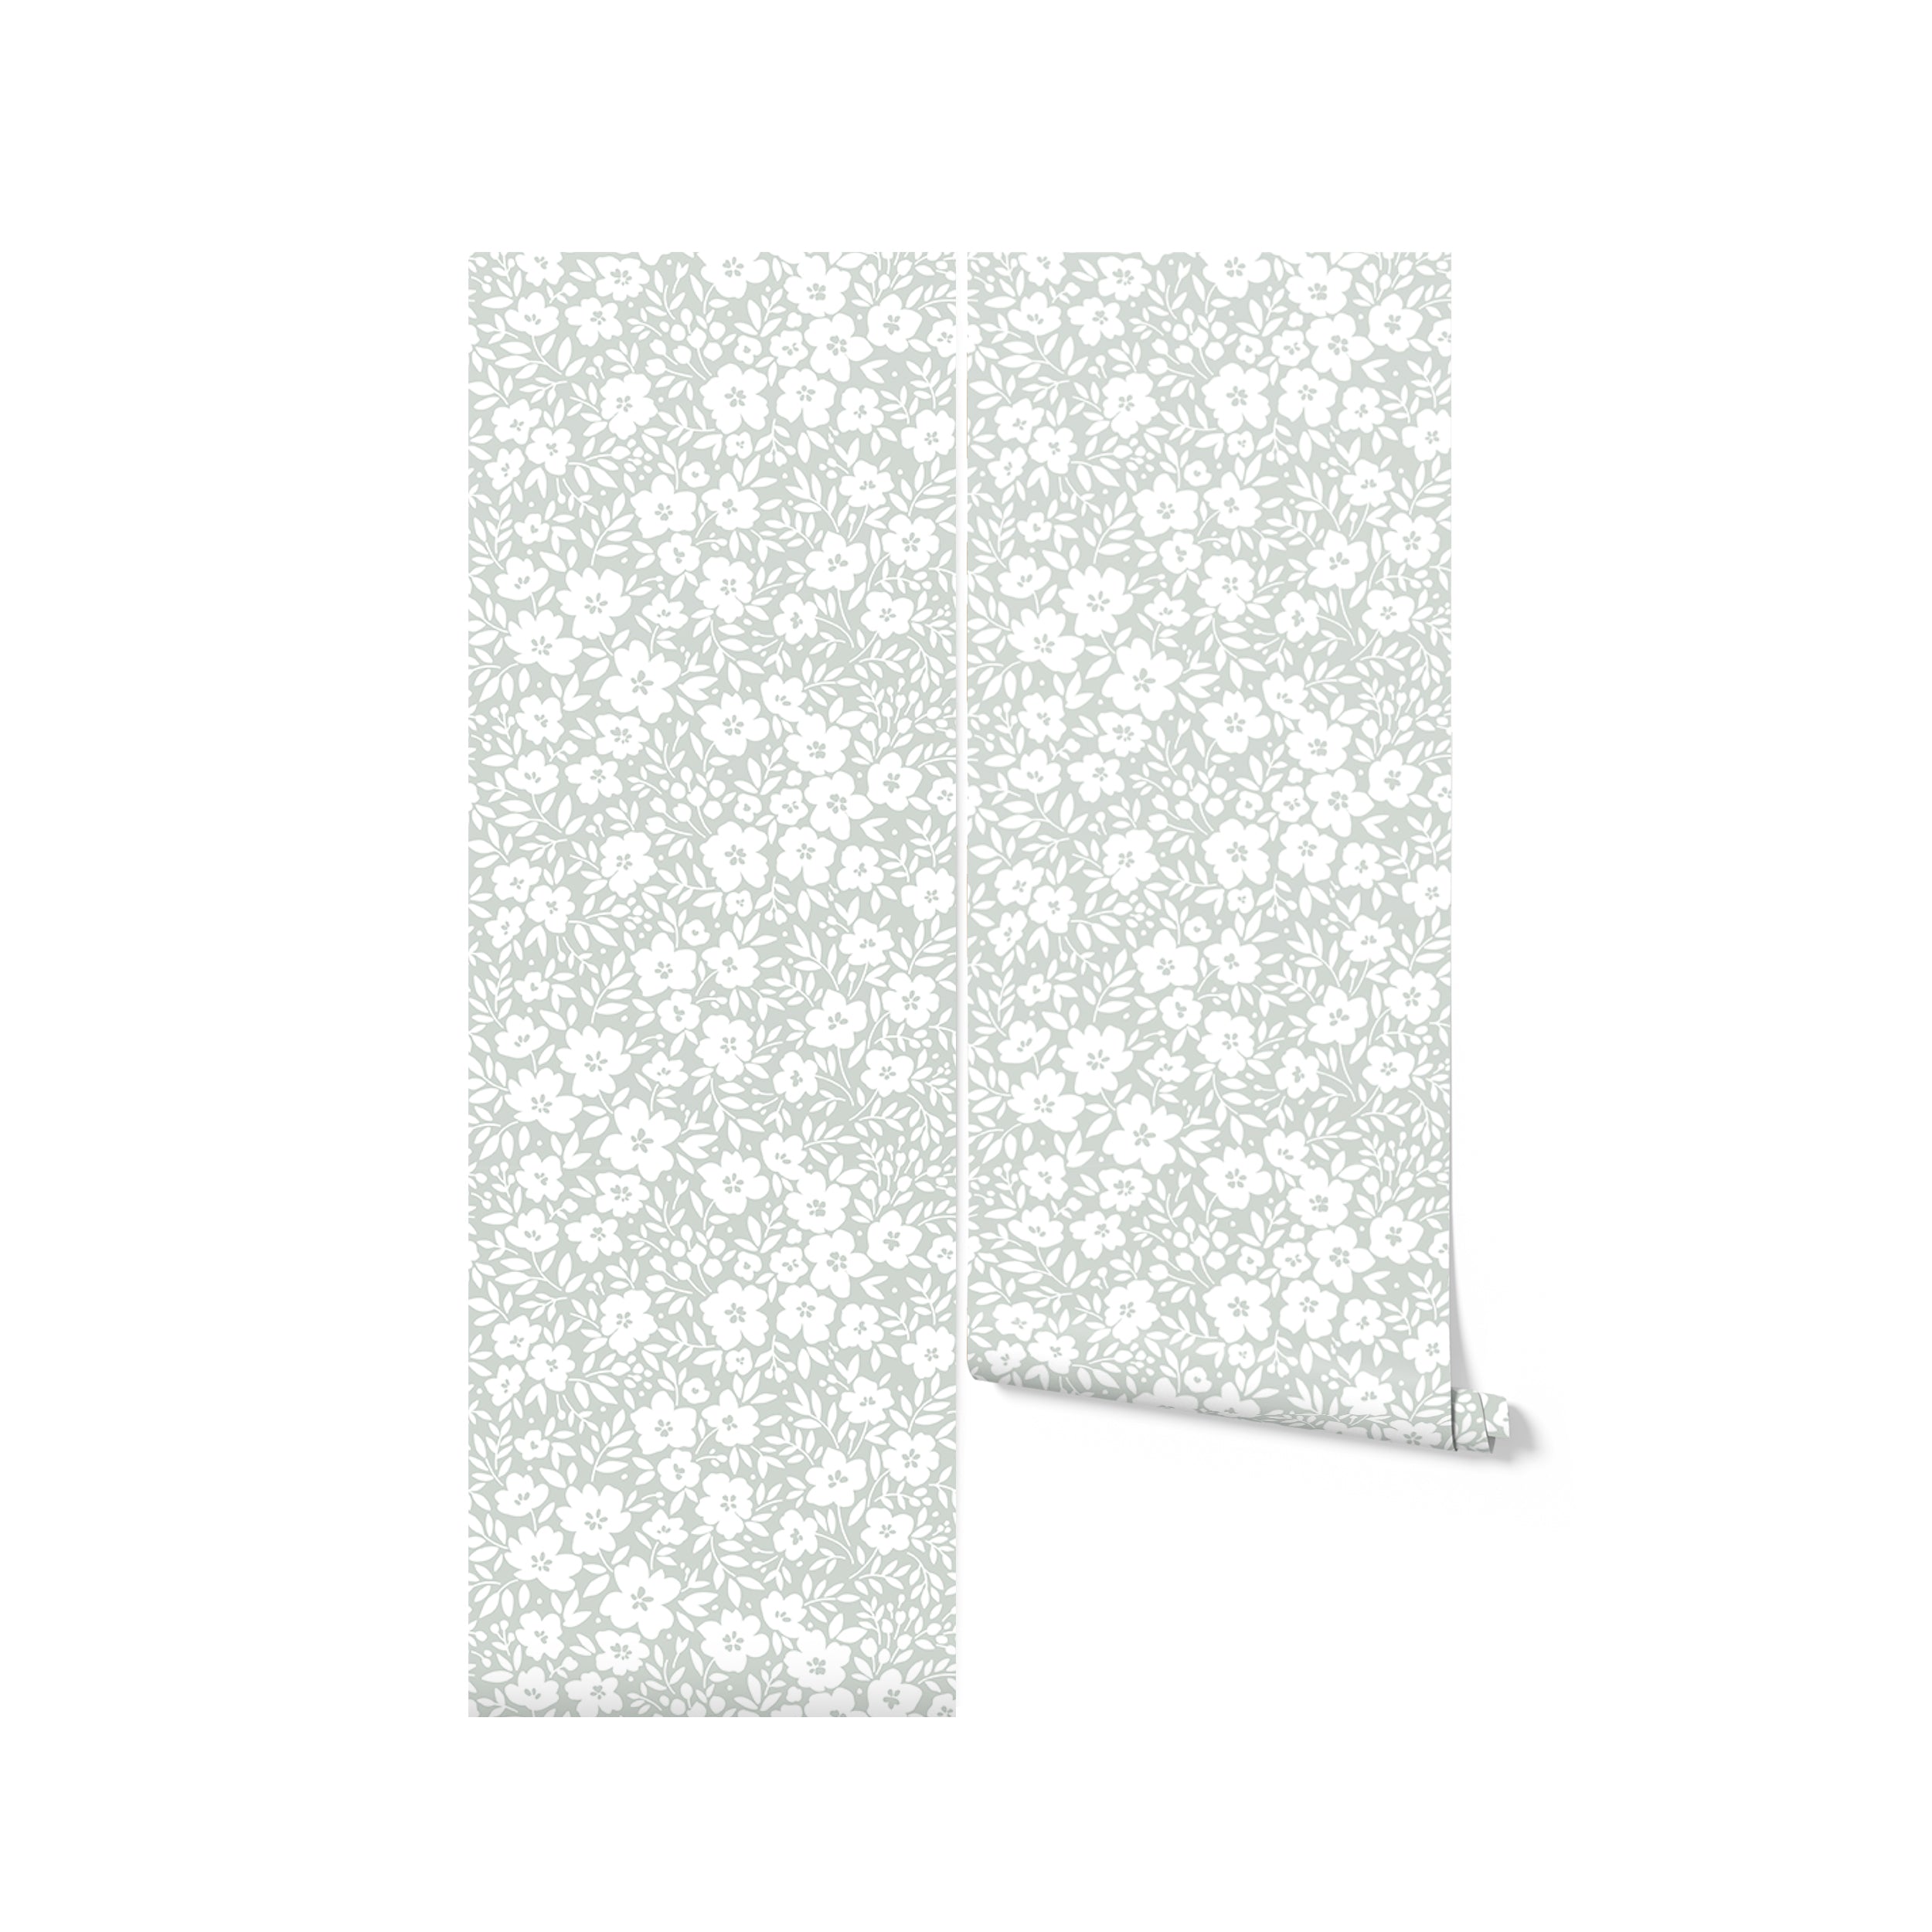 Roll of Flower Power Wallpaper in Light Sage, ready for application, showcasing the soothing sage color and white floral design that brings a gentle, organic vibe to any room.